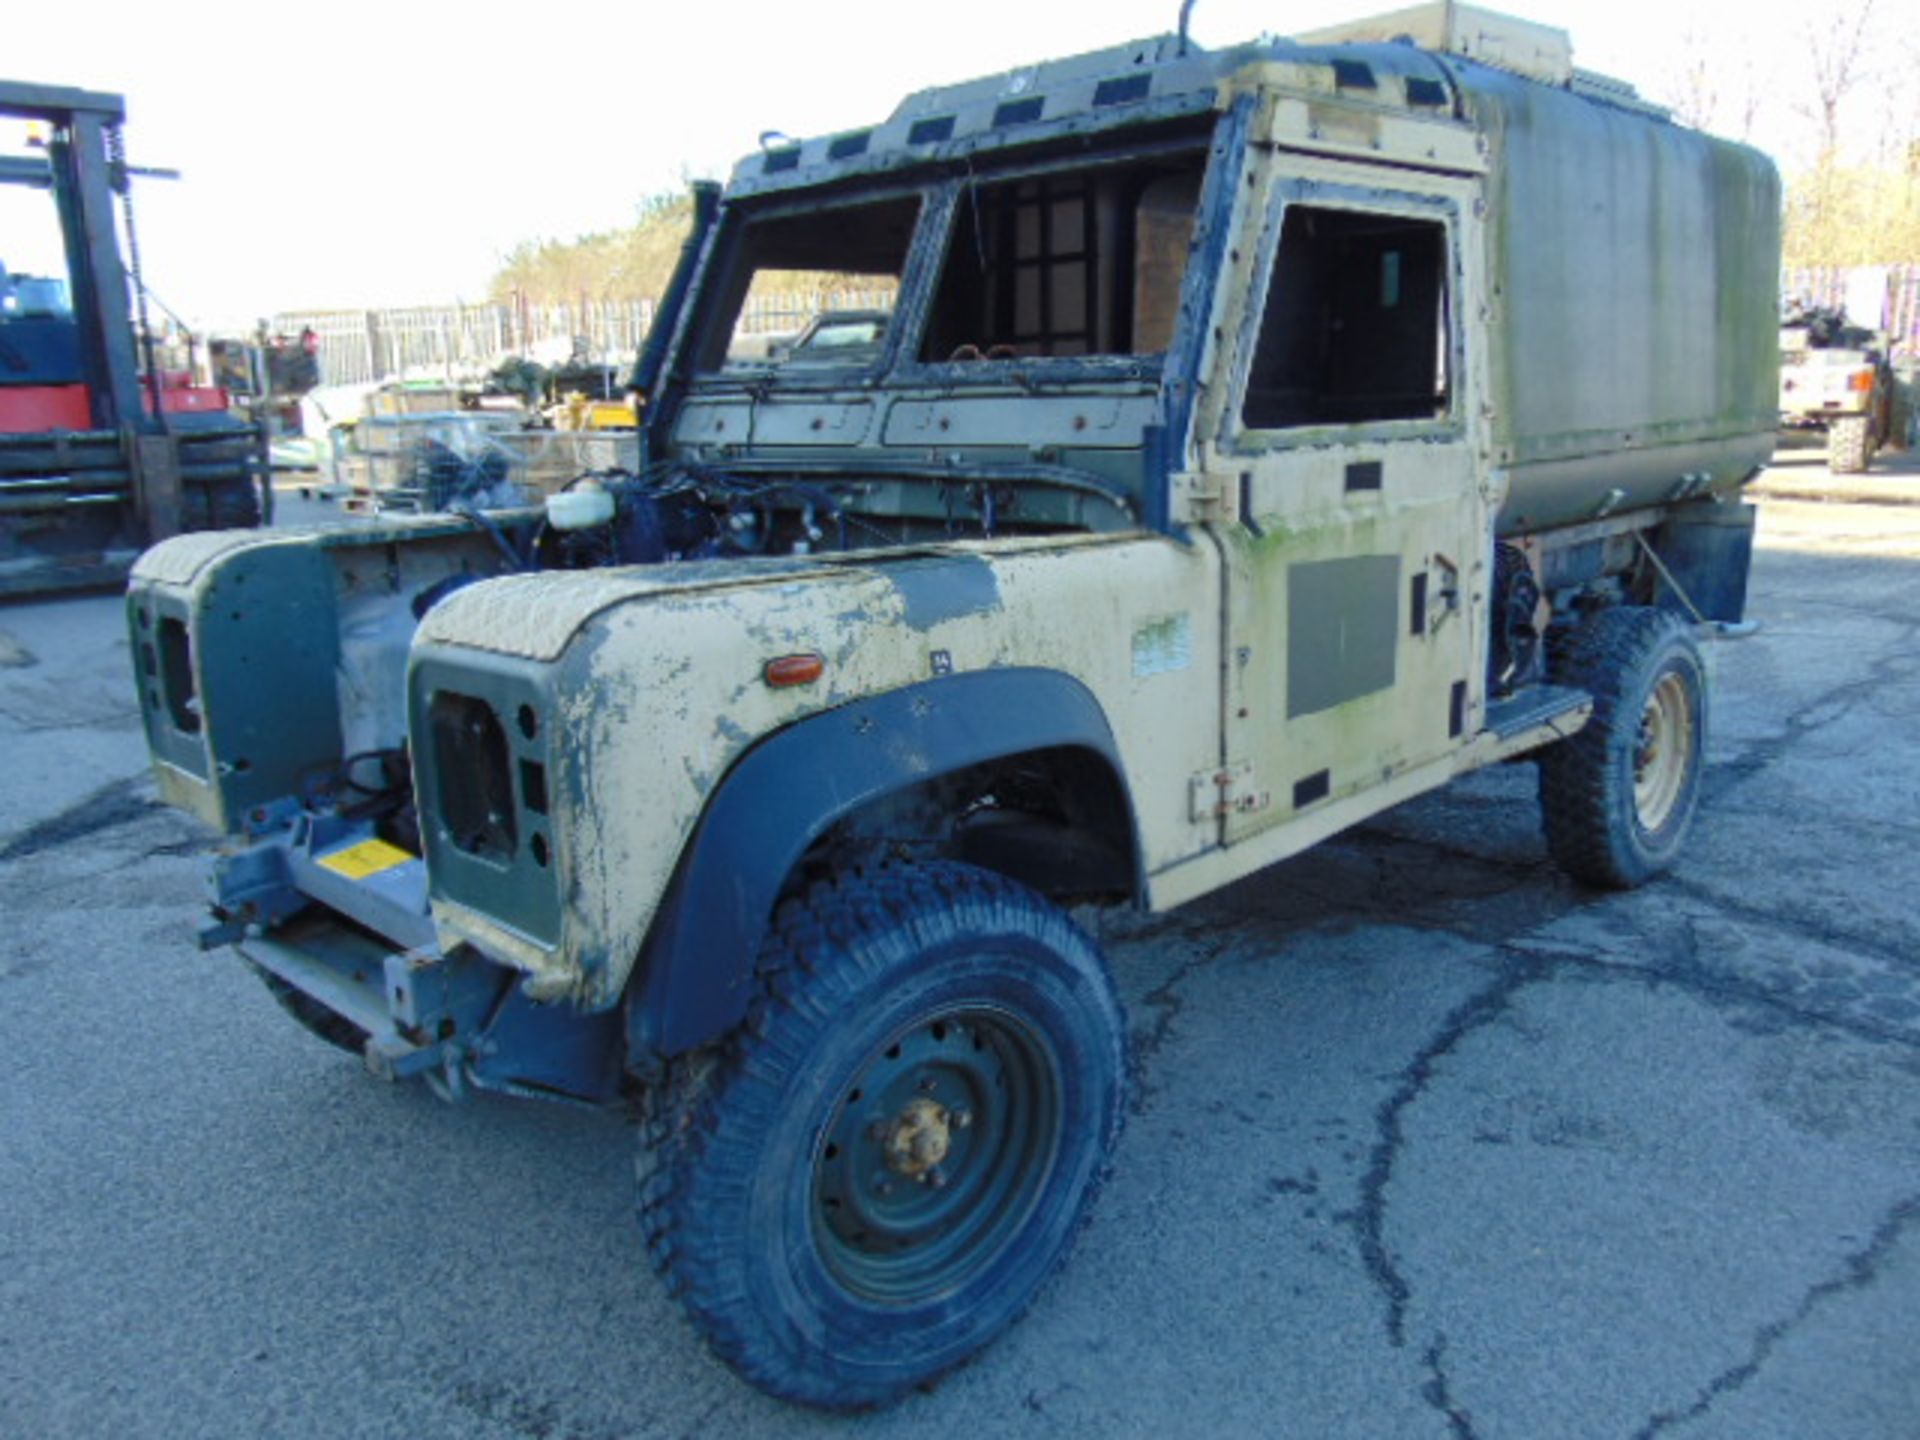 Very Rare Direct from Service Unmanned Landrover 110 300TDi Panama Snatch-2A - Image 3 of 11